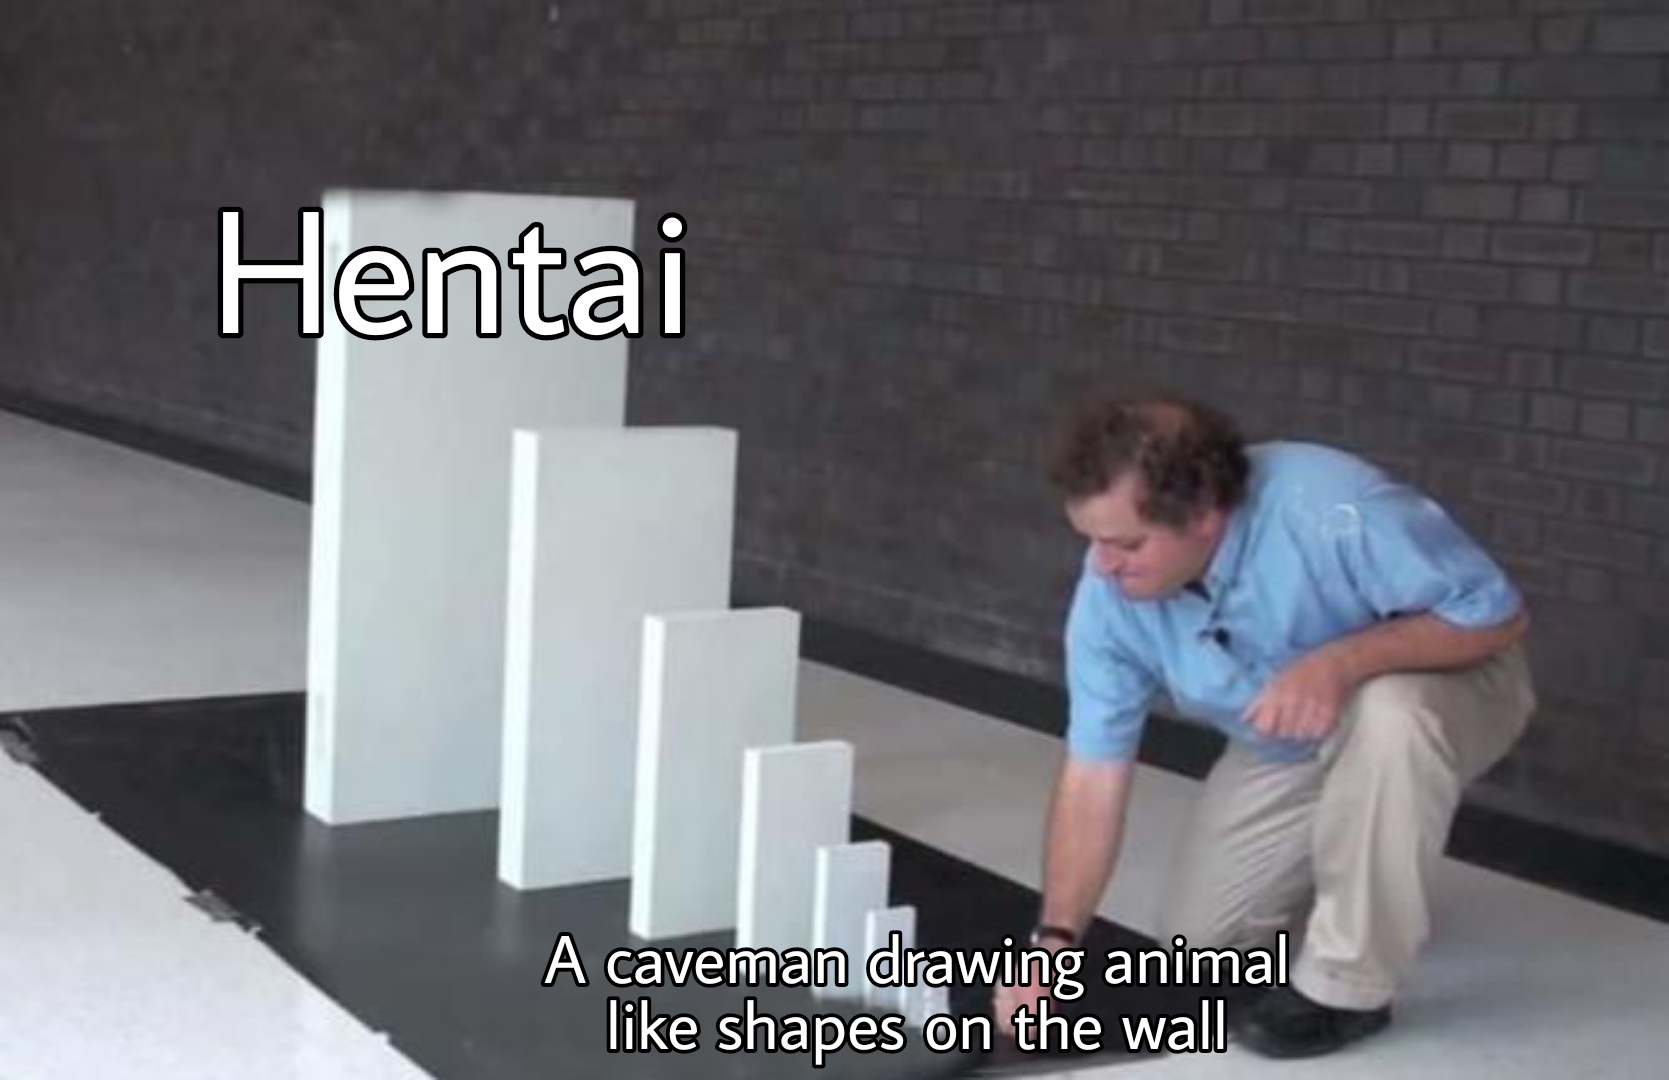 sure hope this doesn t awaken anything - Hentai A caveman drawing animal shapes on the wall